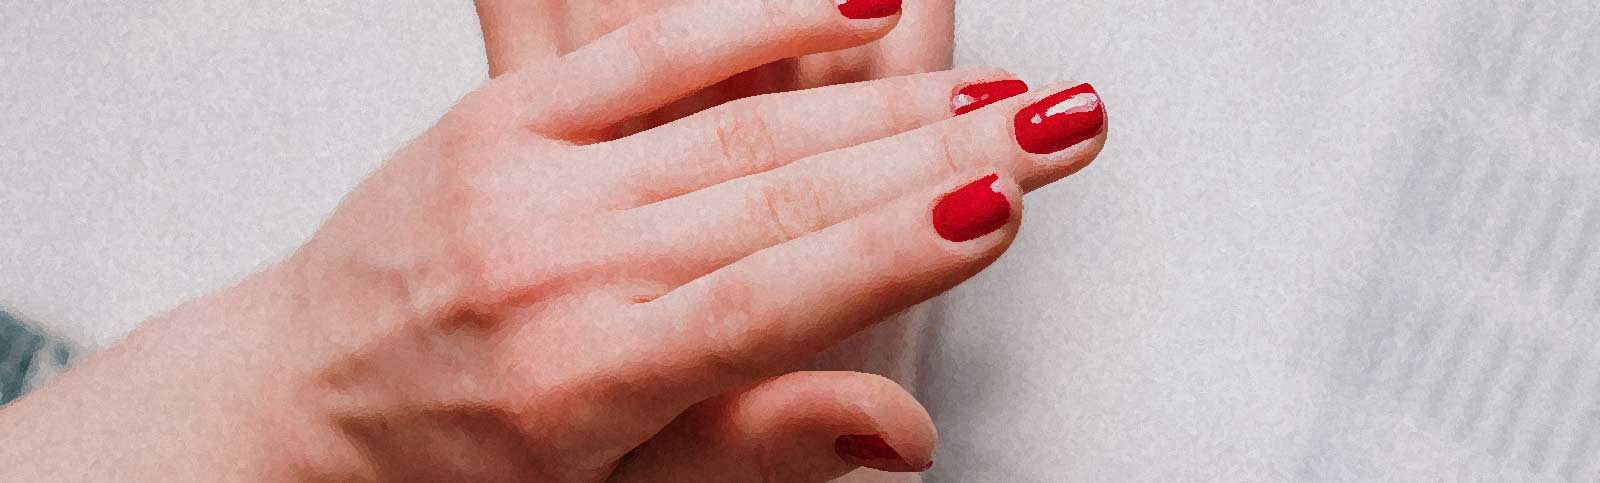 How To Find A Nail Salon You Can Trust